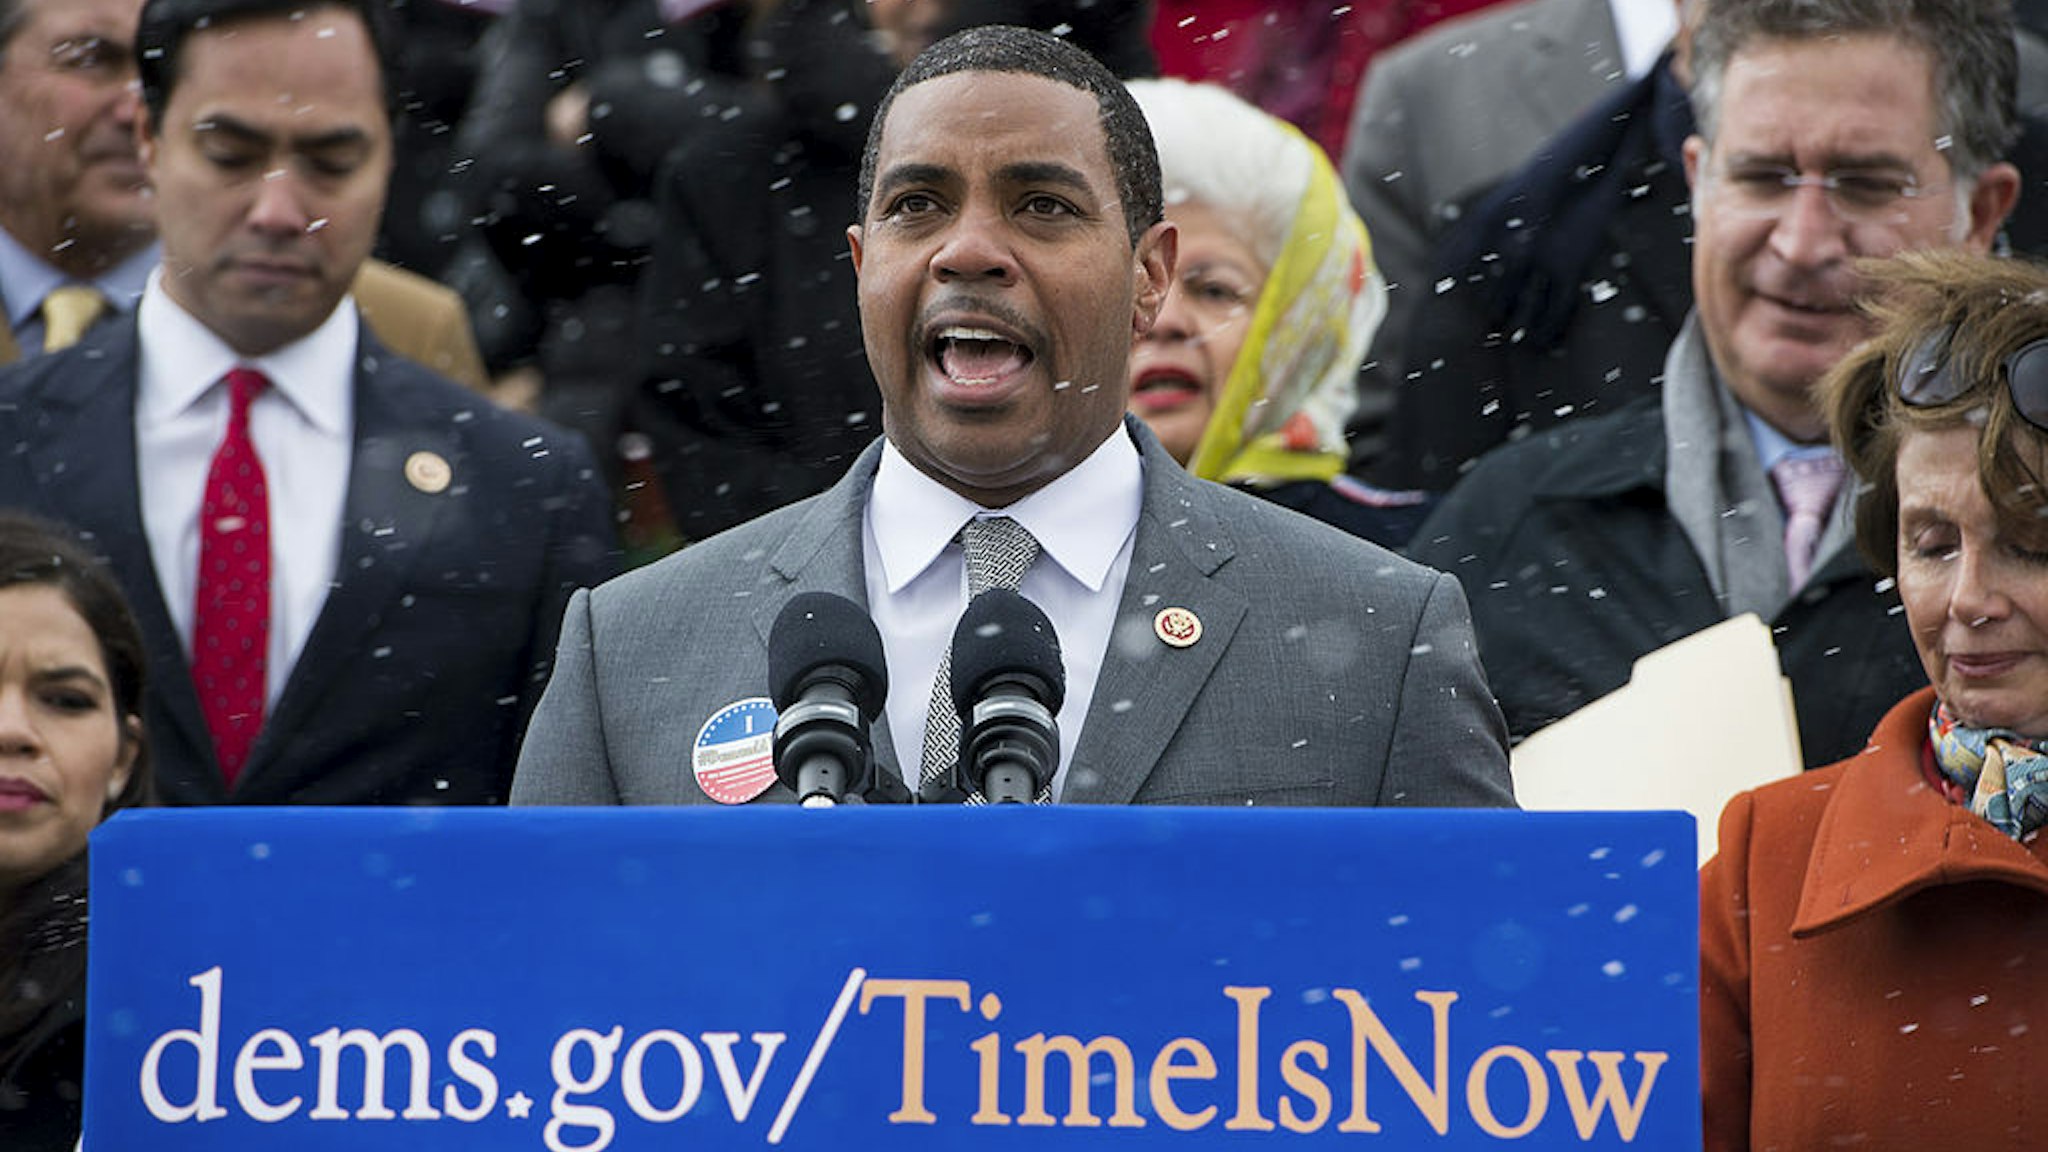 Rep. Steve Horsford, D-Nev., speaks as House Democrats and immigration reform advocates gather on the House steps during a snow squall before heading back into the Capitol to force a vote on immigration reform on Wednesday, March 26, 2014.